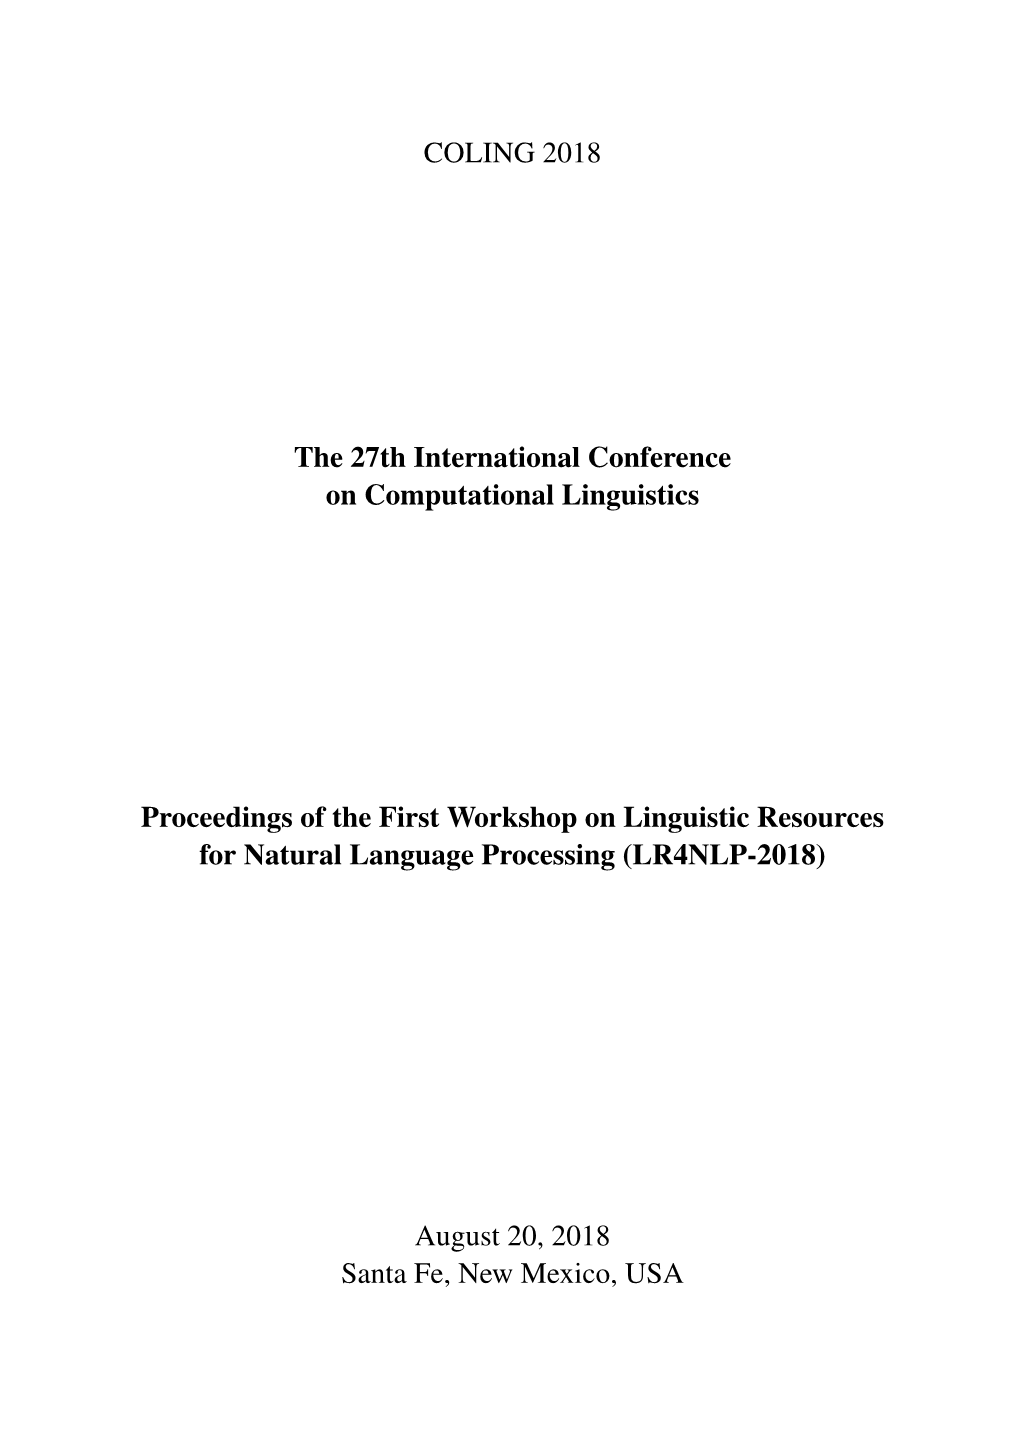 Proceedings of the First Workshop on Linguistic Resources for Natural Language Processing (LR4NLP-2018)